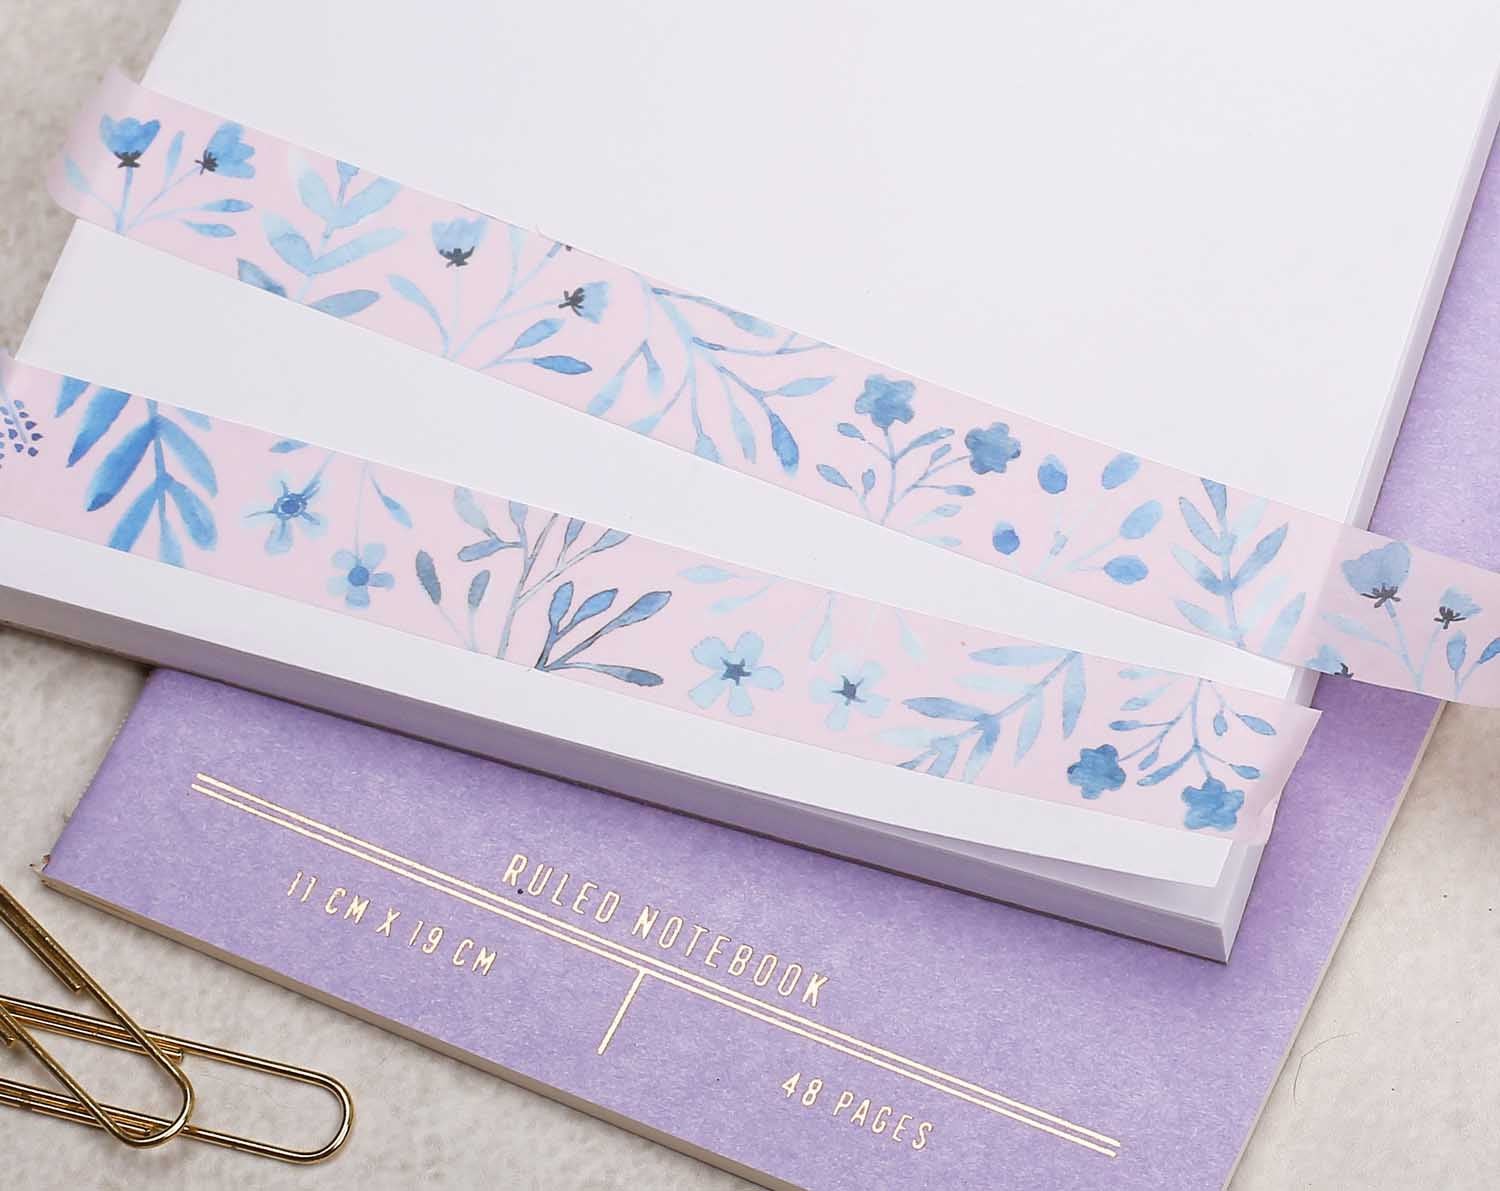  premium Washi Tape features paintings of beautiful blue florals on a light pink background